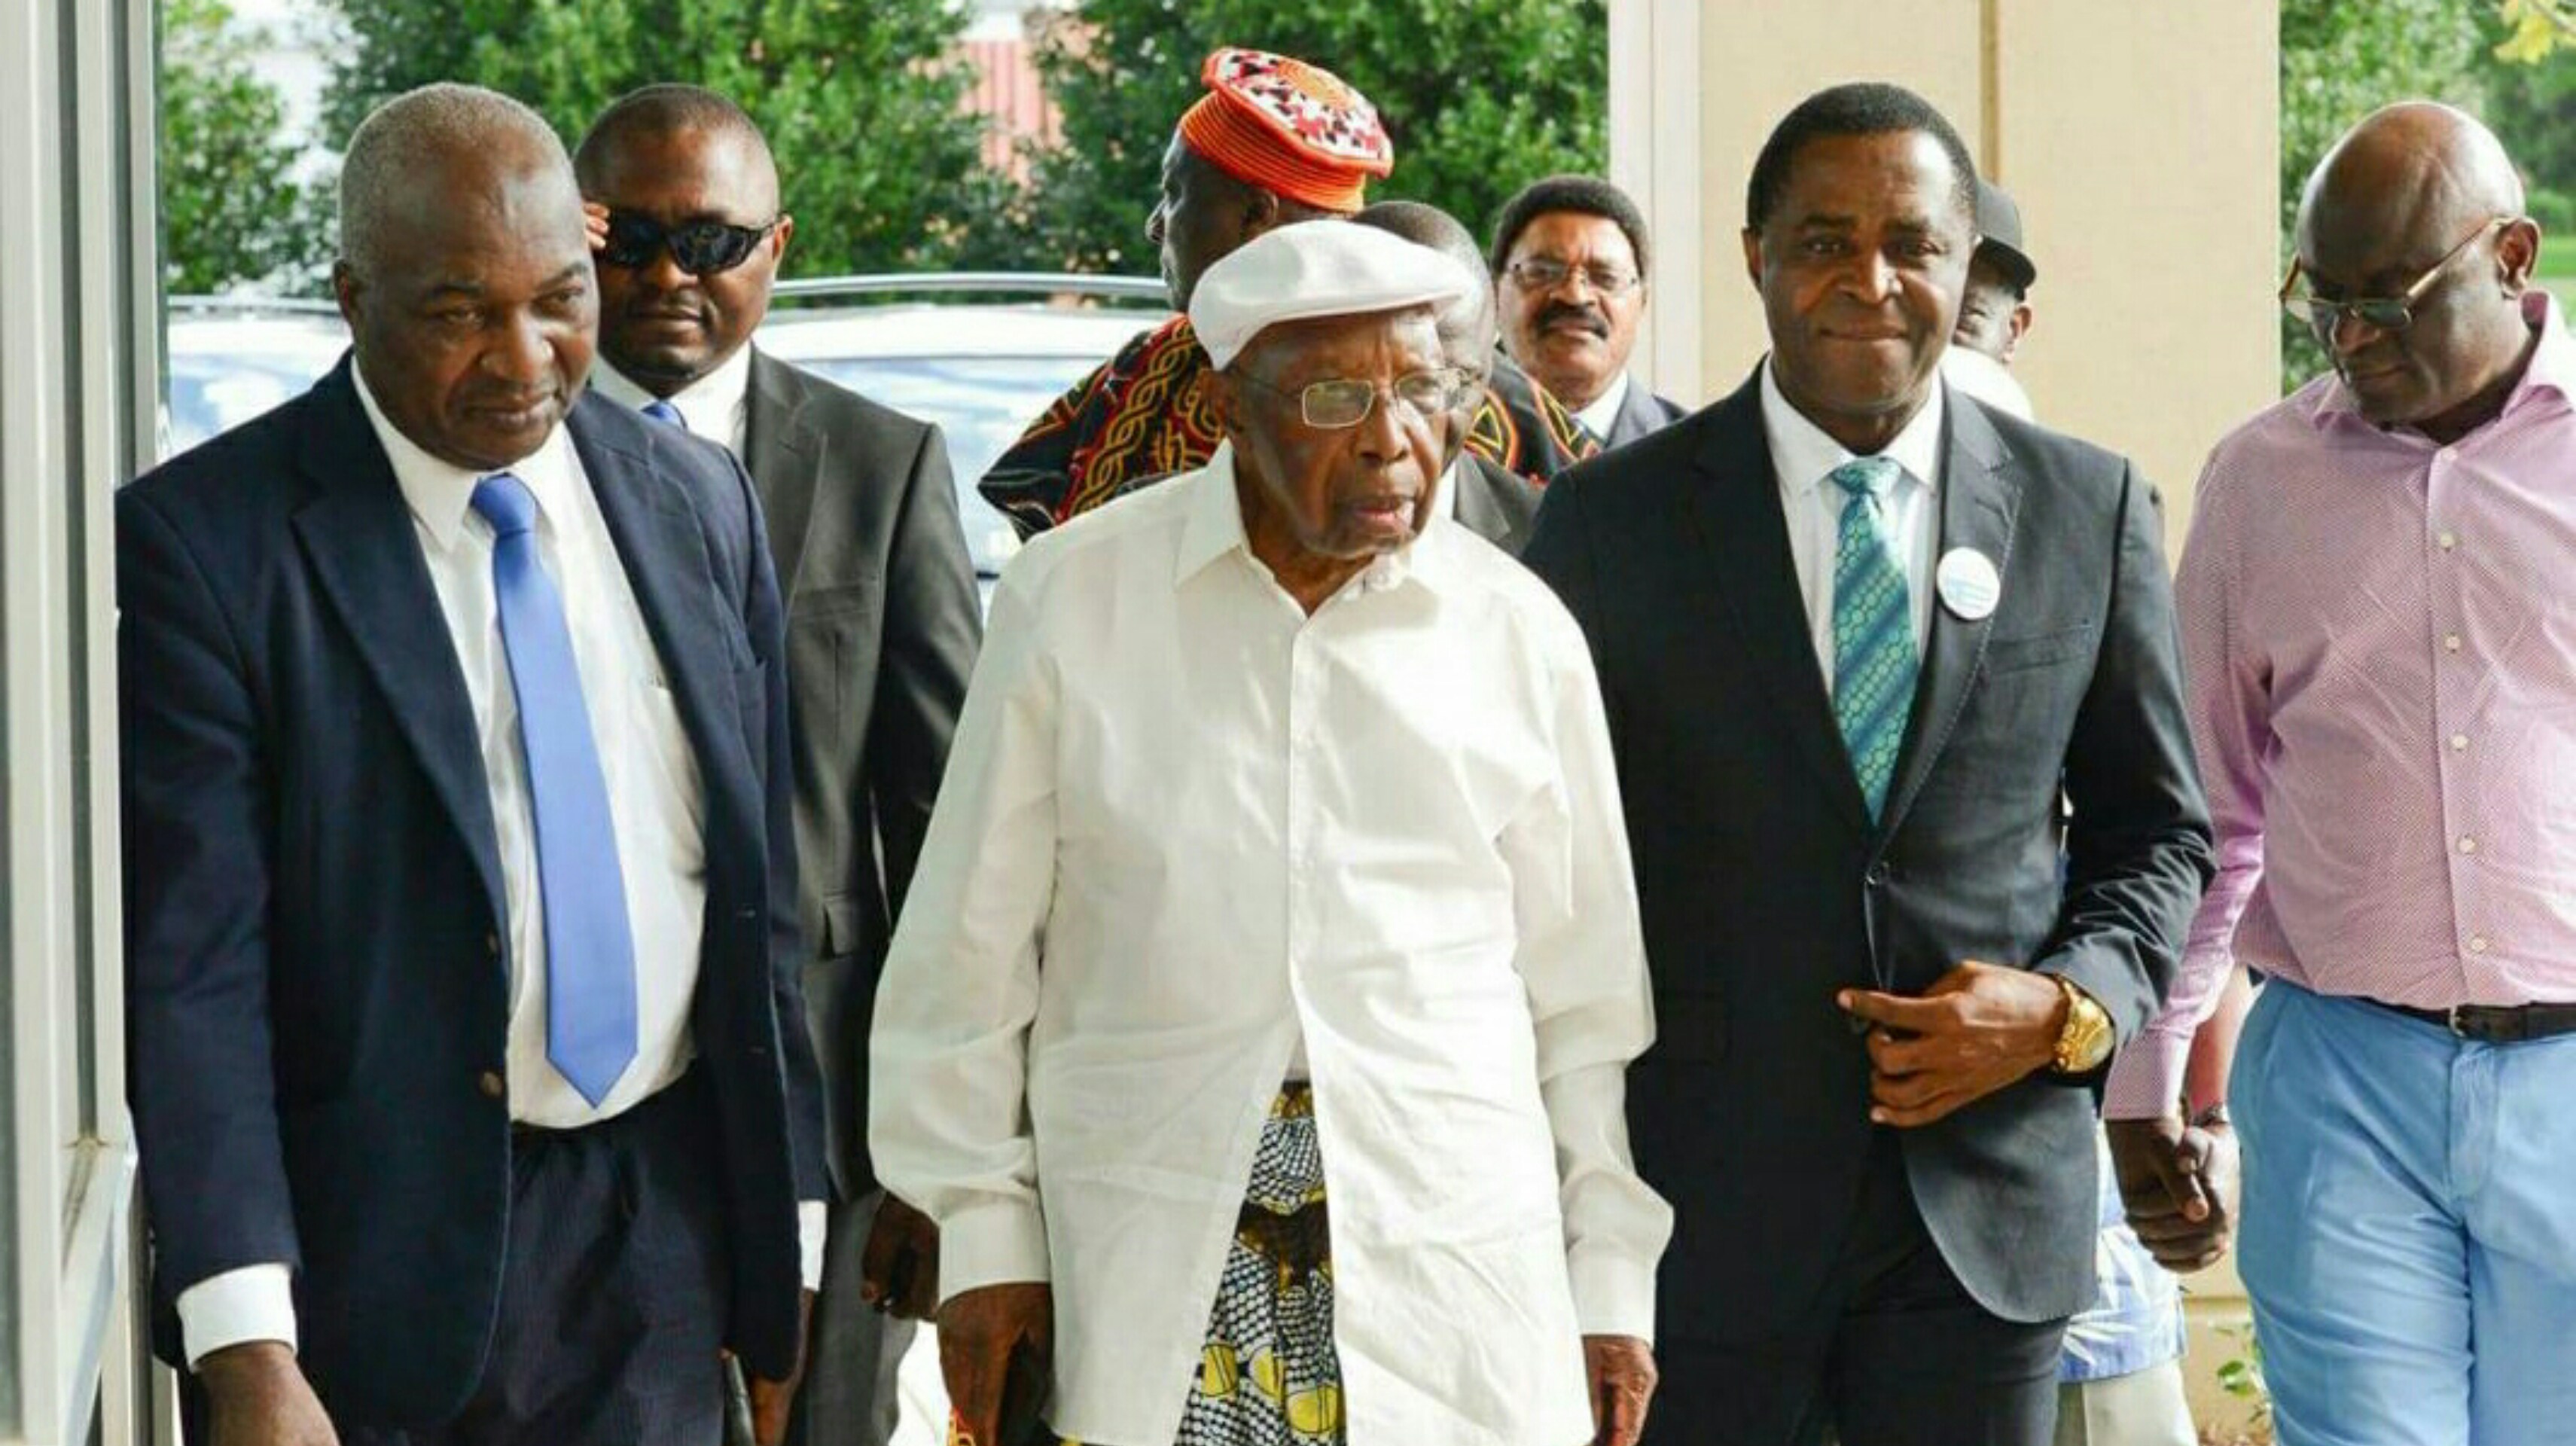 Ambazonia: Head of State promises to keep military options open against La Republique